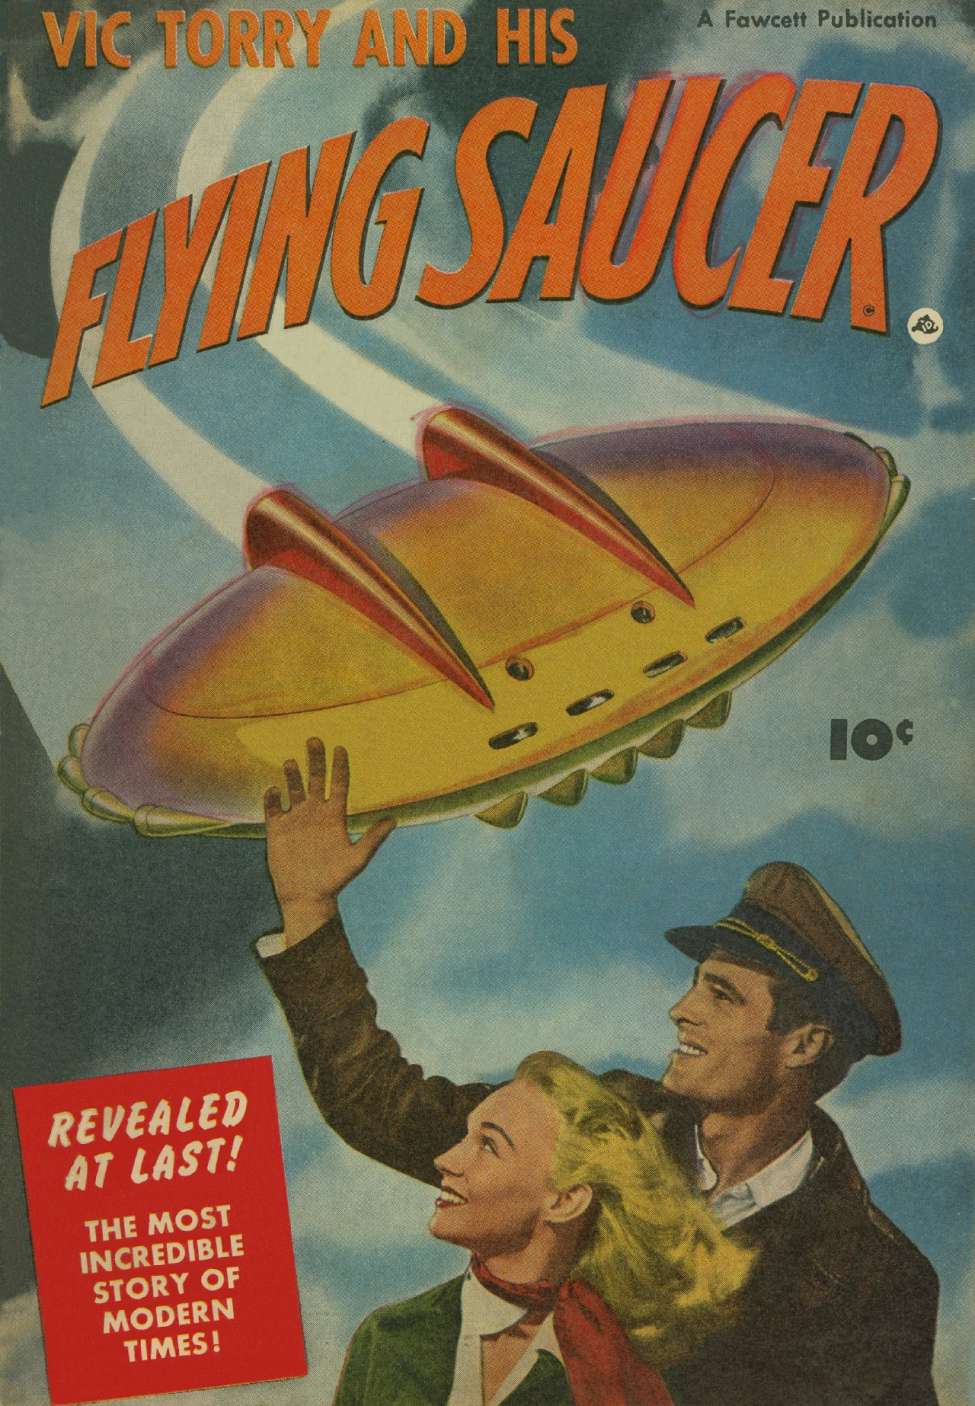 Book Cover For Vic Torry and His Flying Saucer - Version 1